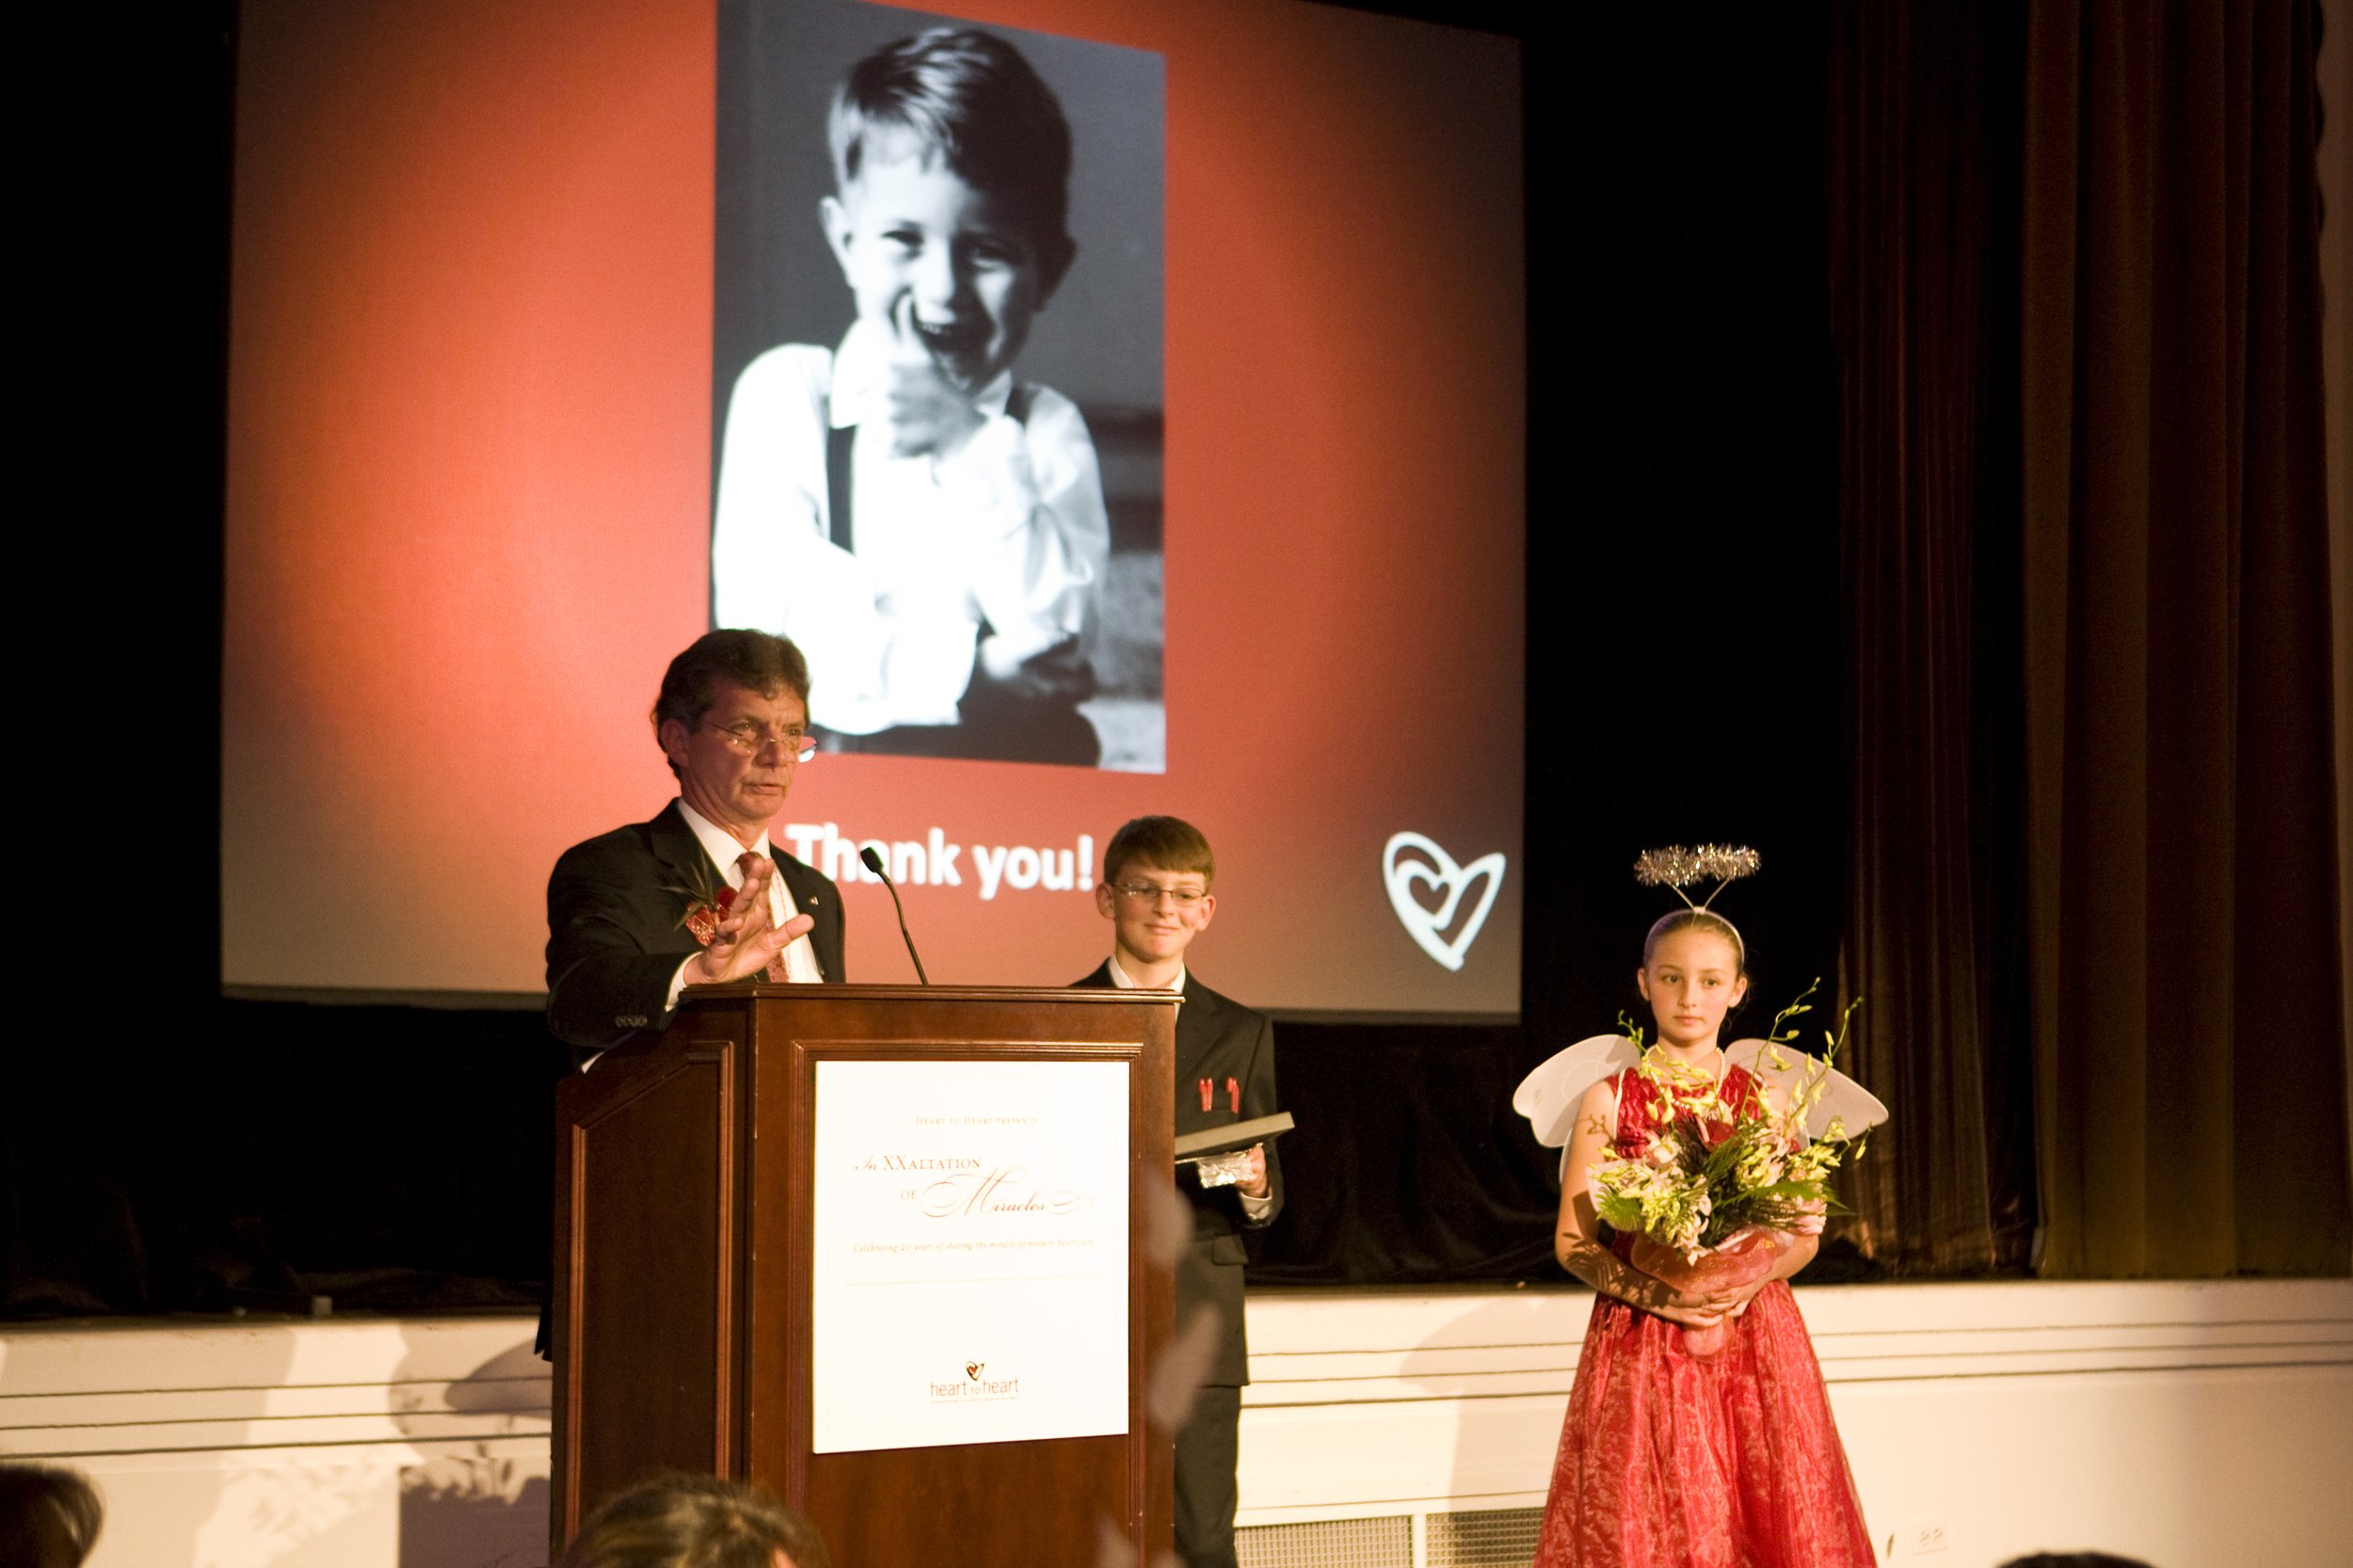  Speaking at Heart to Heart’s 20th anniversary event on February 14, 2009. 